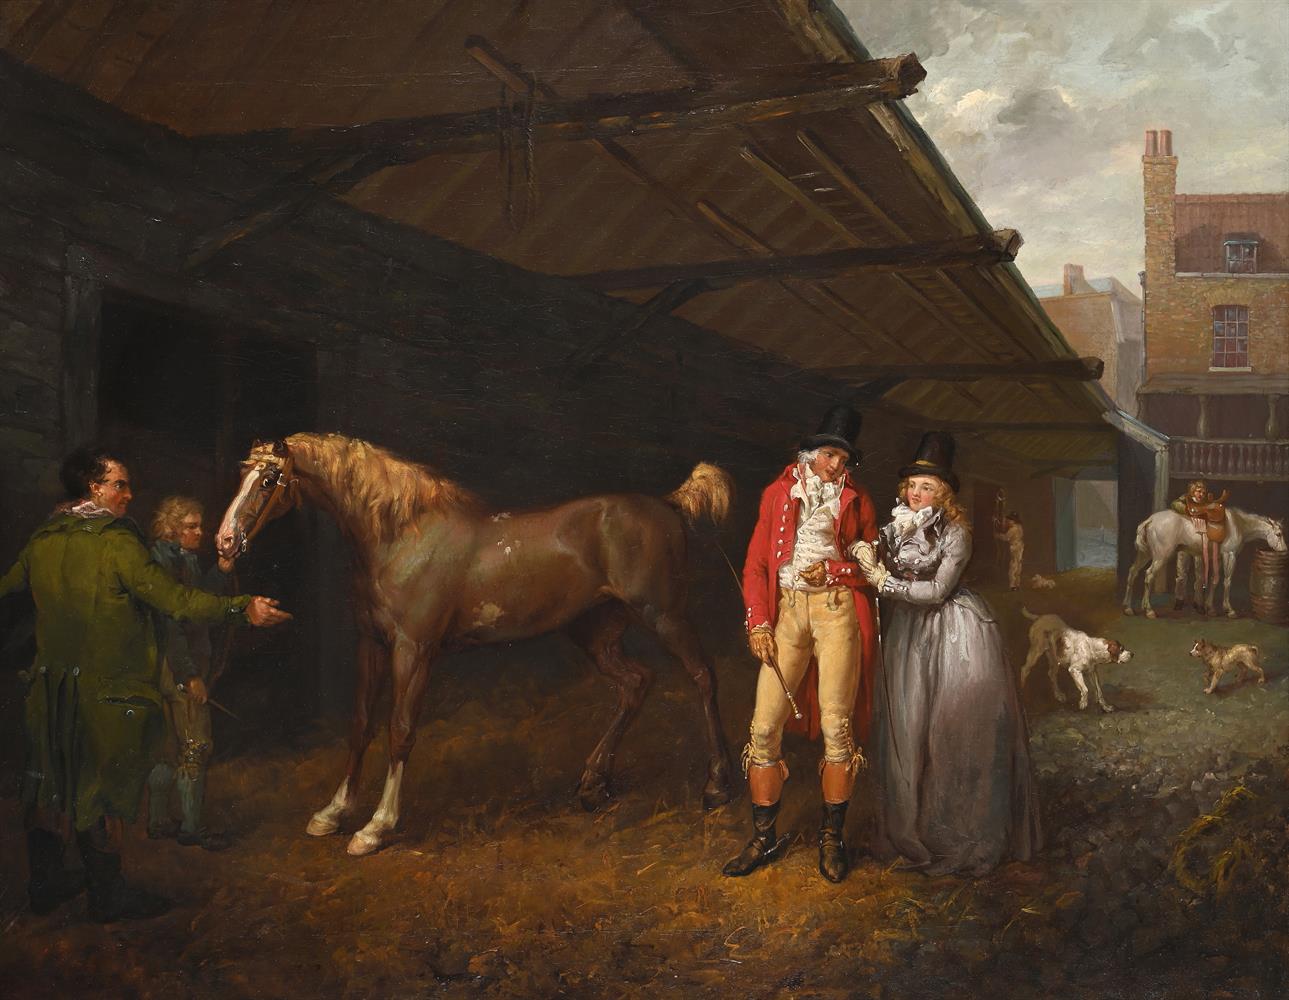 JAMES WARD (BRITISH 1759-1859), A LIVERY STABLE